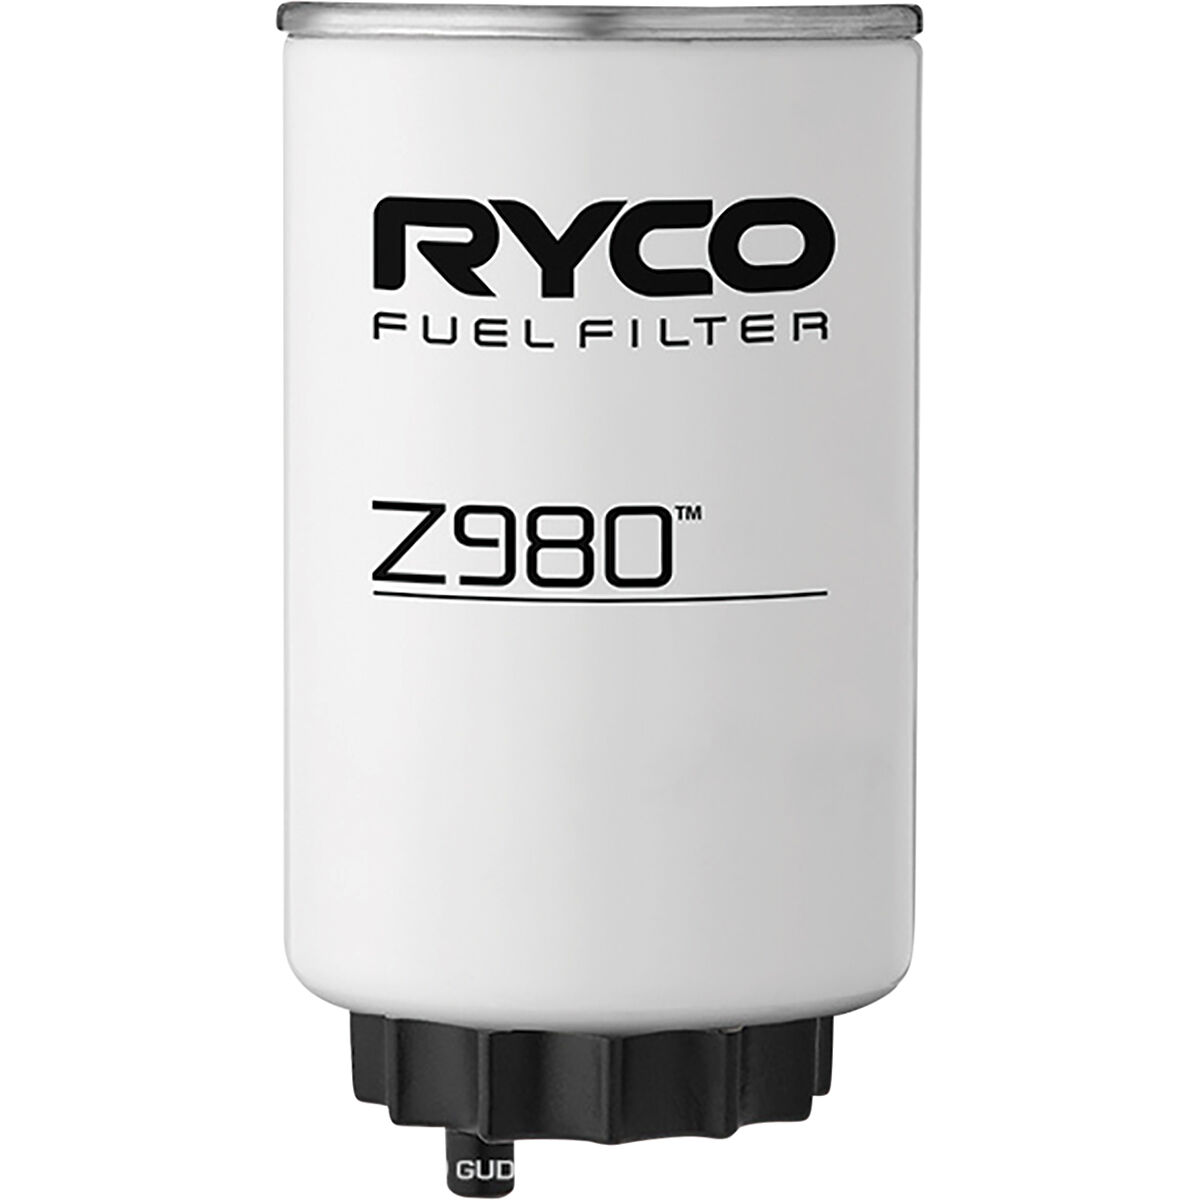 Ryco Replacement Fuel Filter For 4WD Water Separator Kits - Z980, , scaau_hi-res